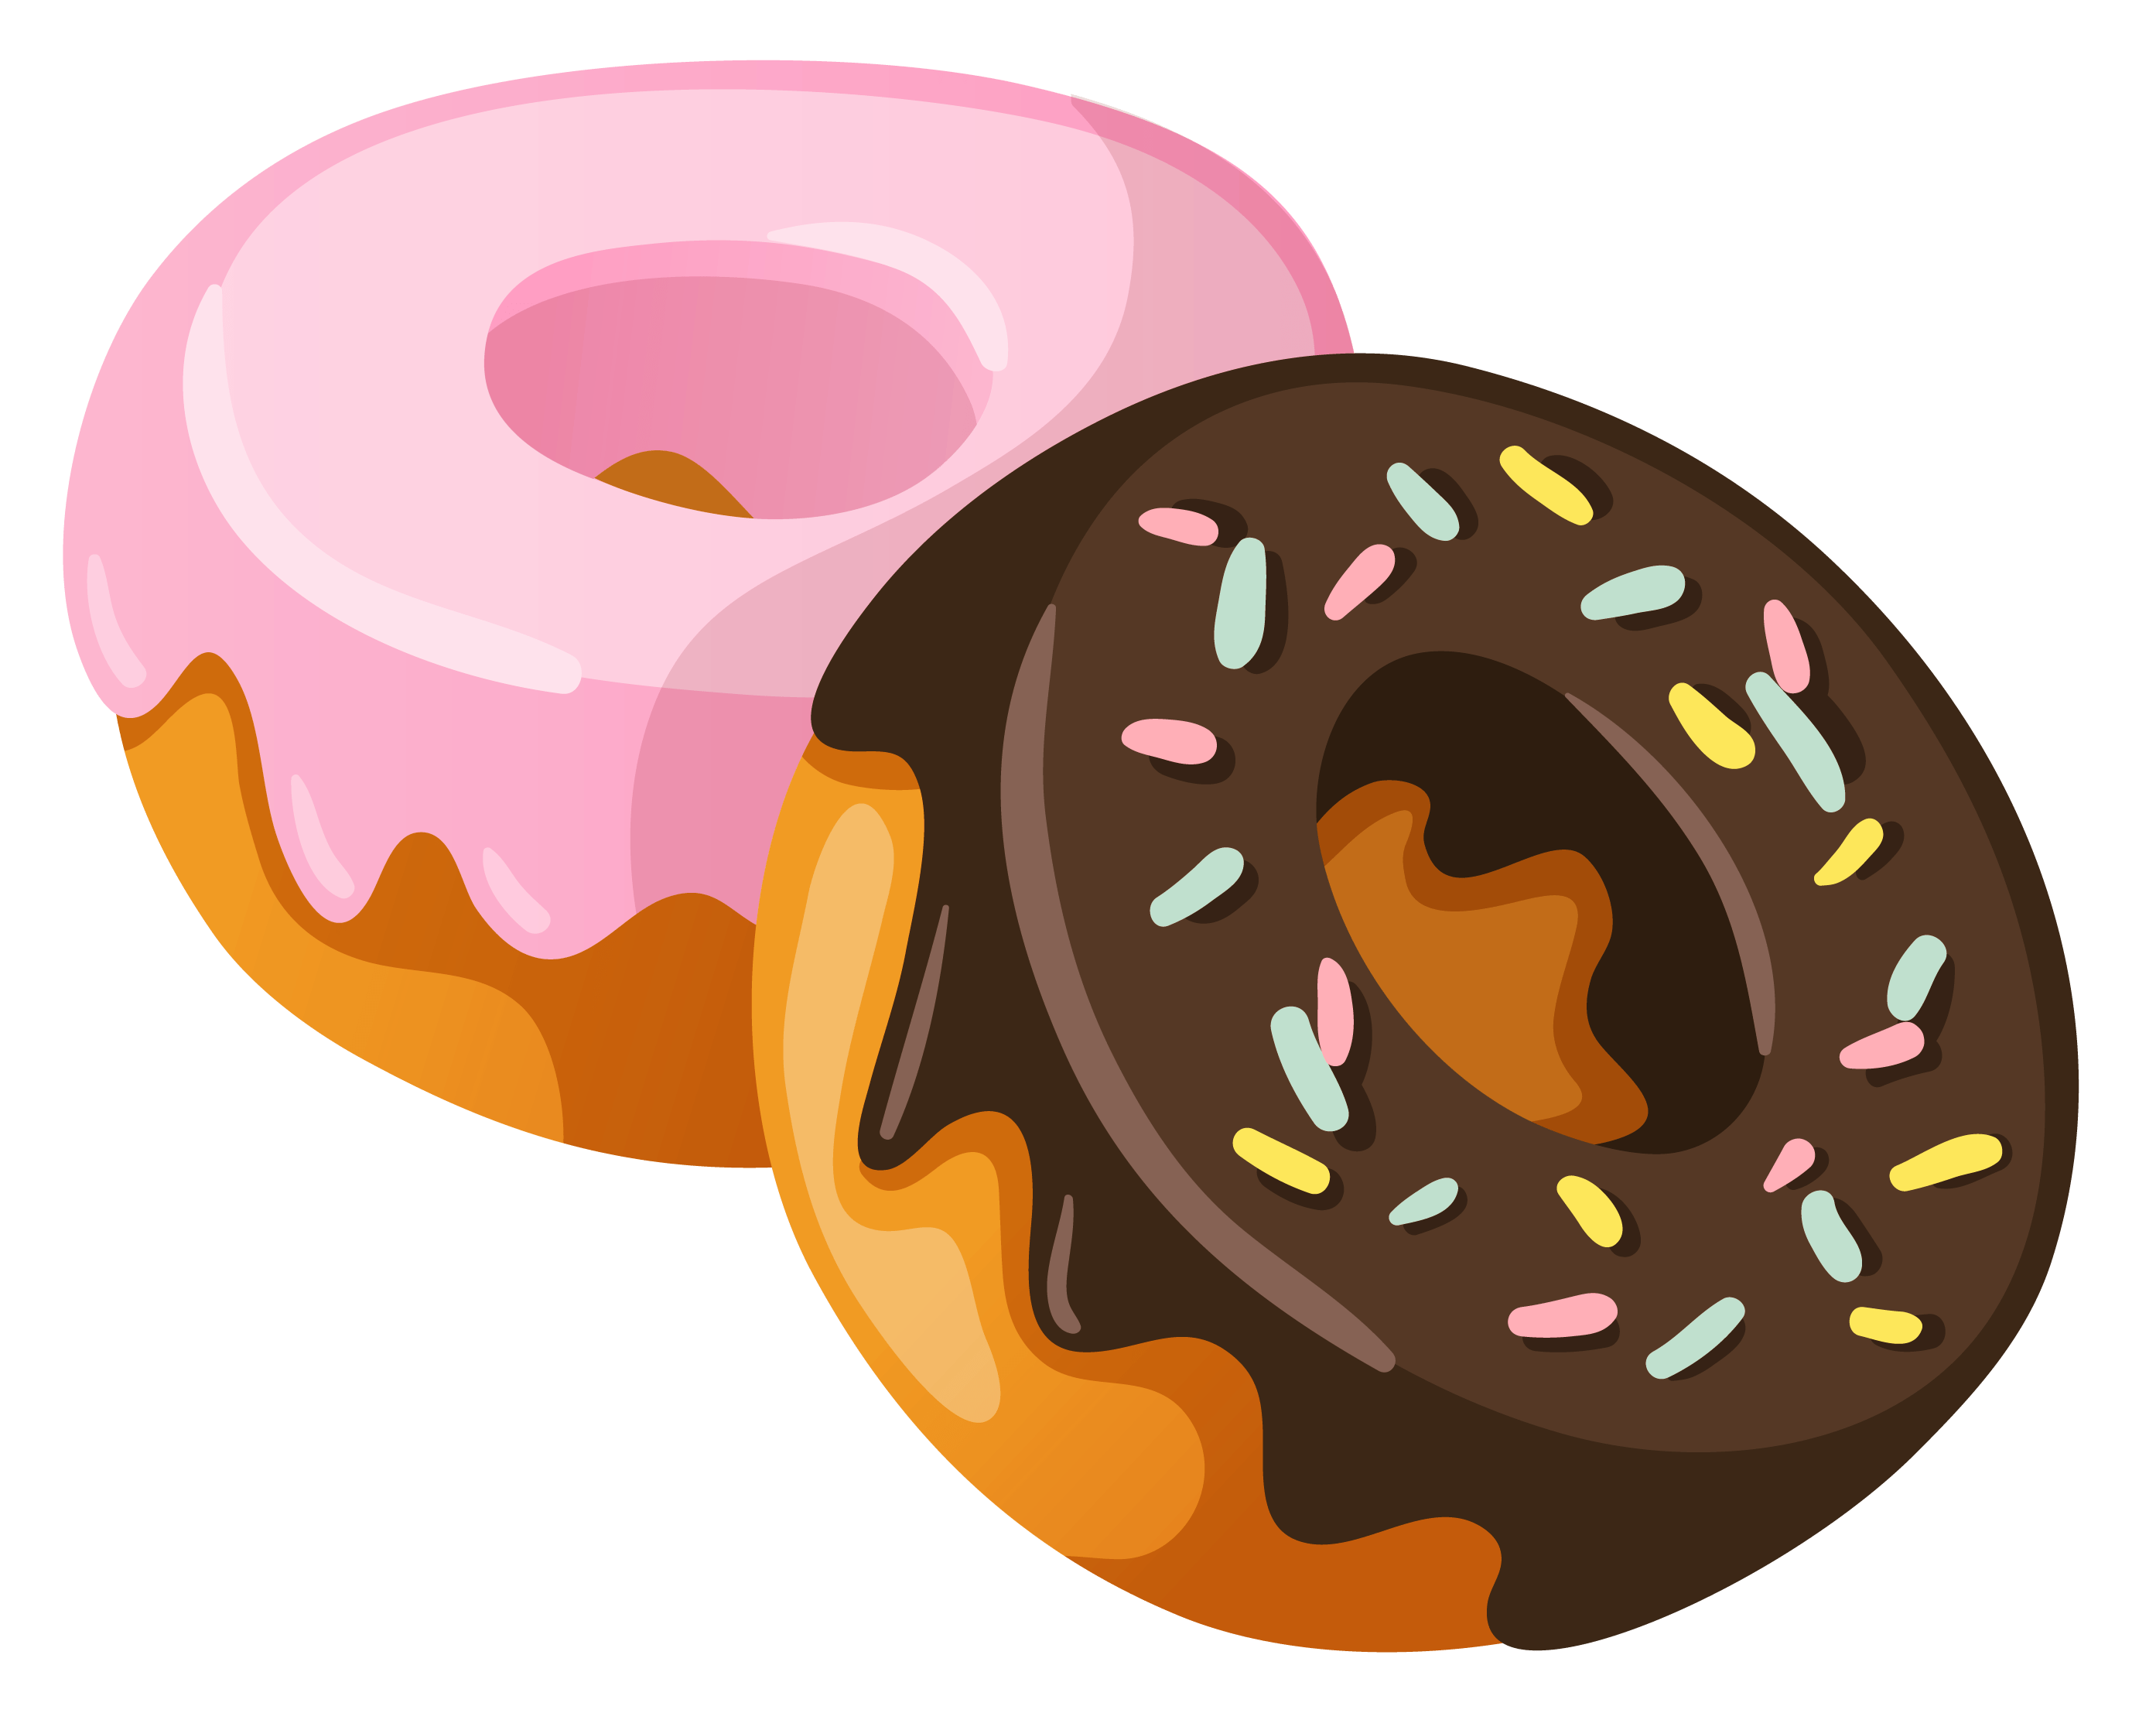 Free Donut Png Clipart, Download Free Donut Png Clipart png images